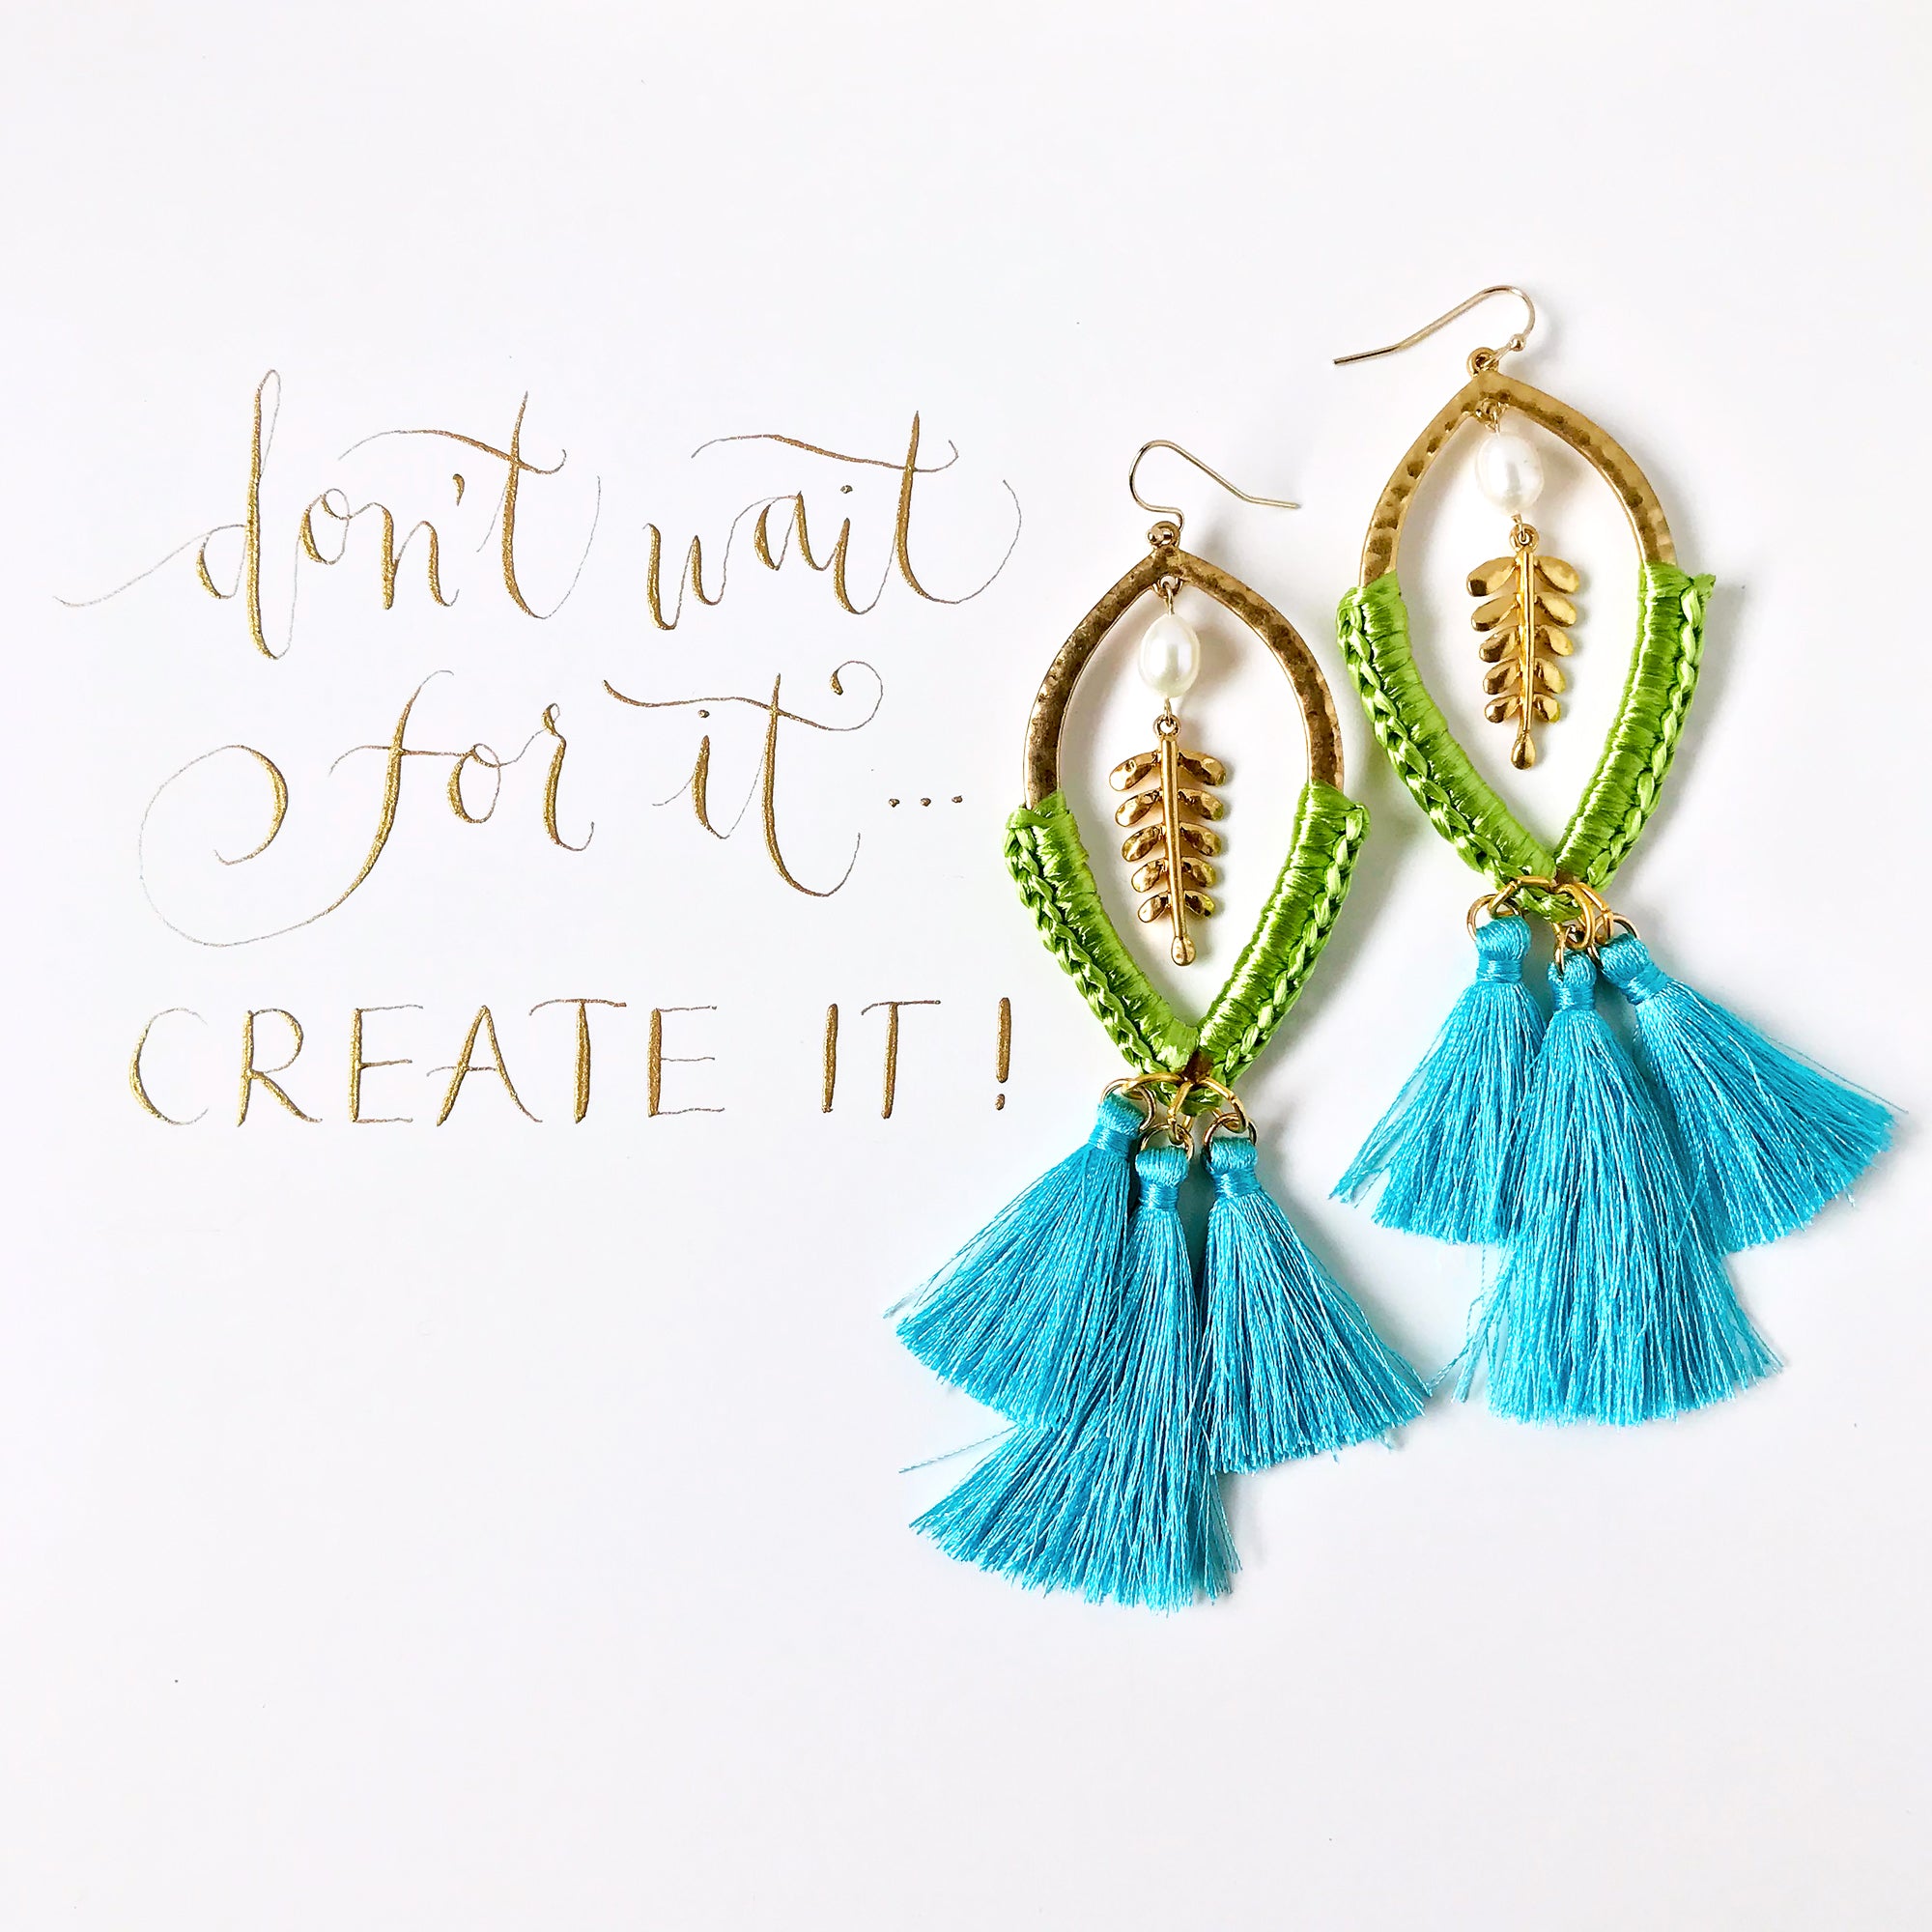 #SequinSayings - Don't Wait for It, Create It!